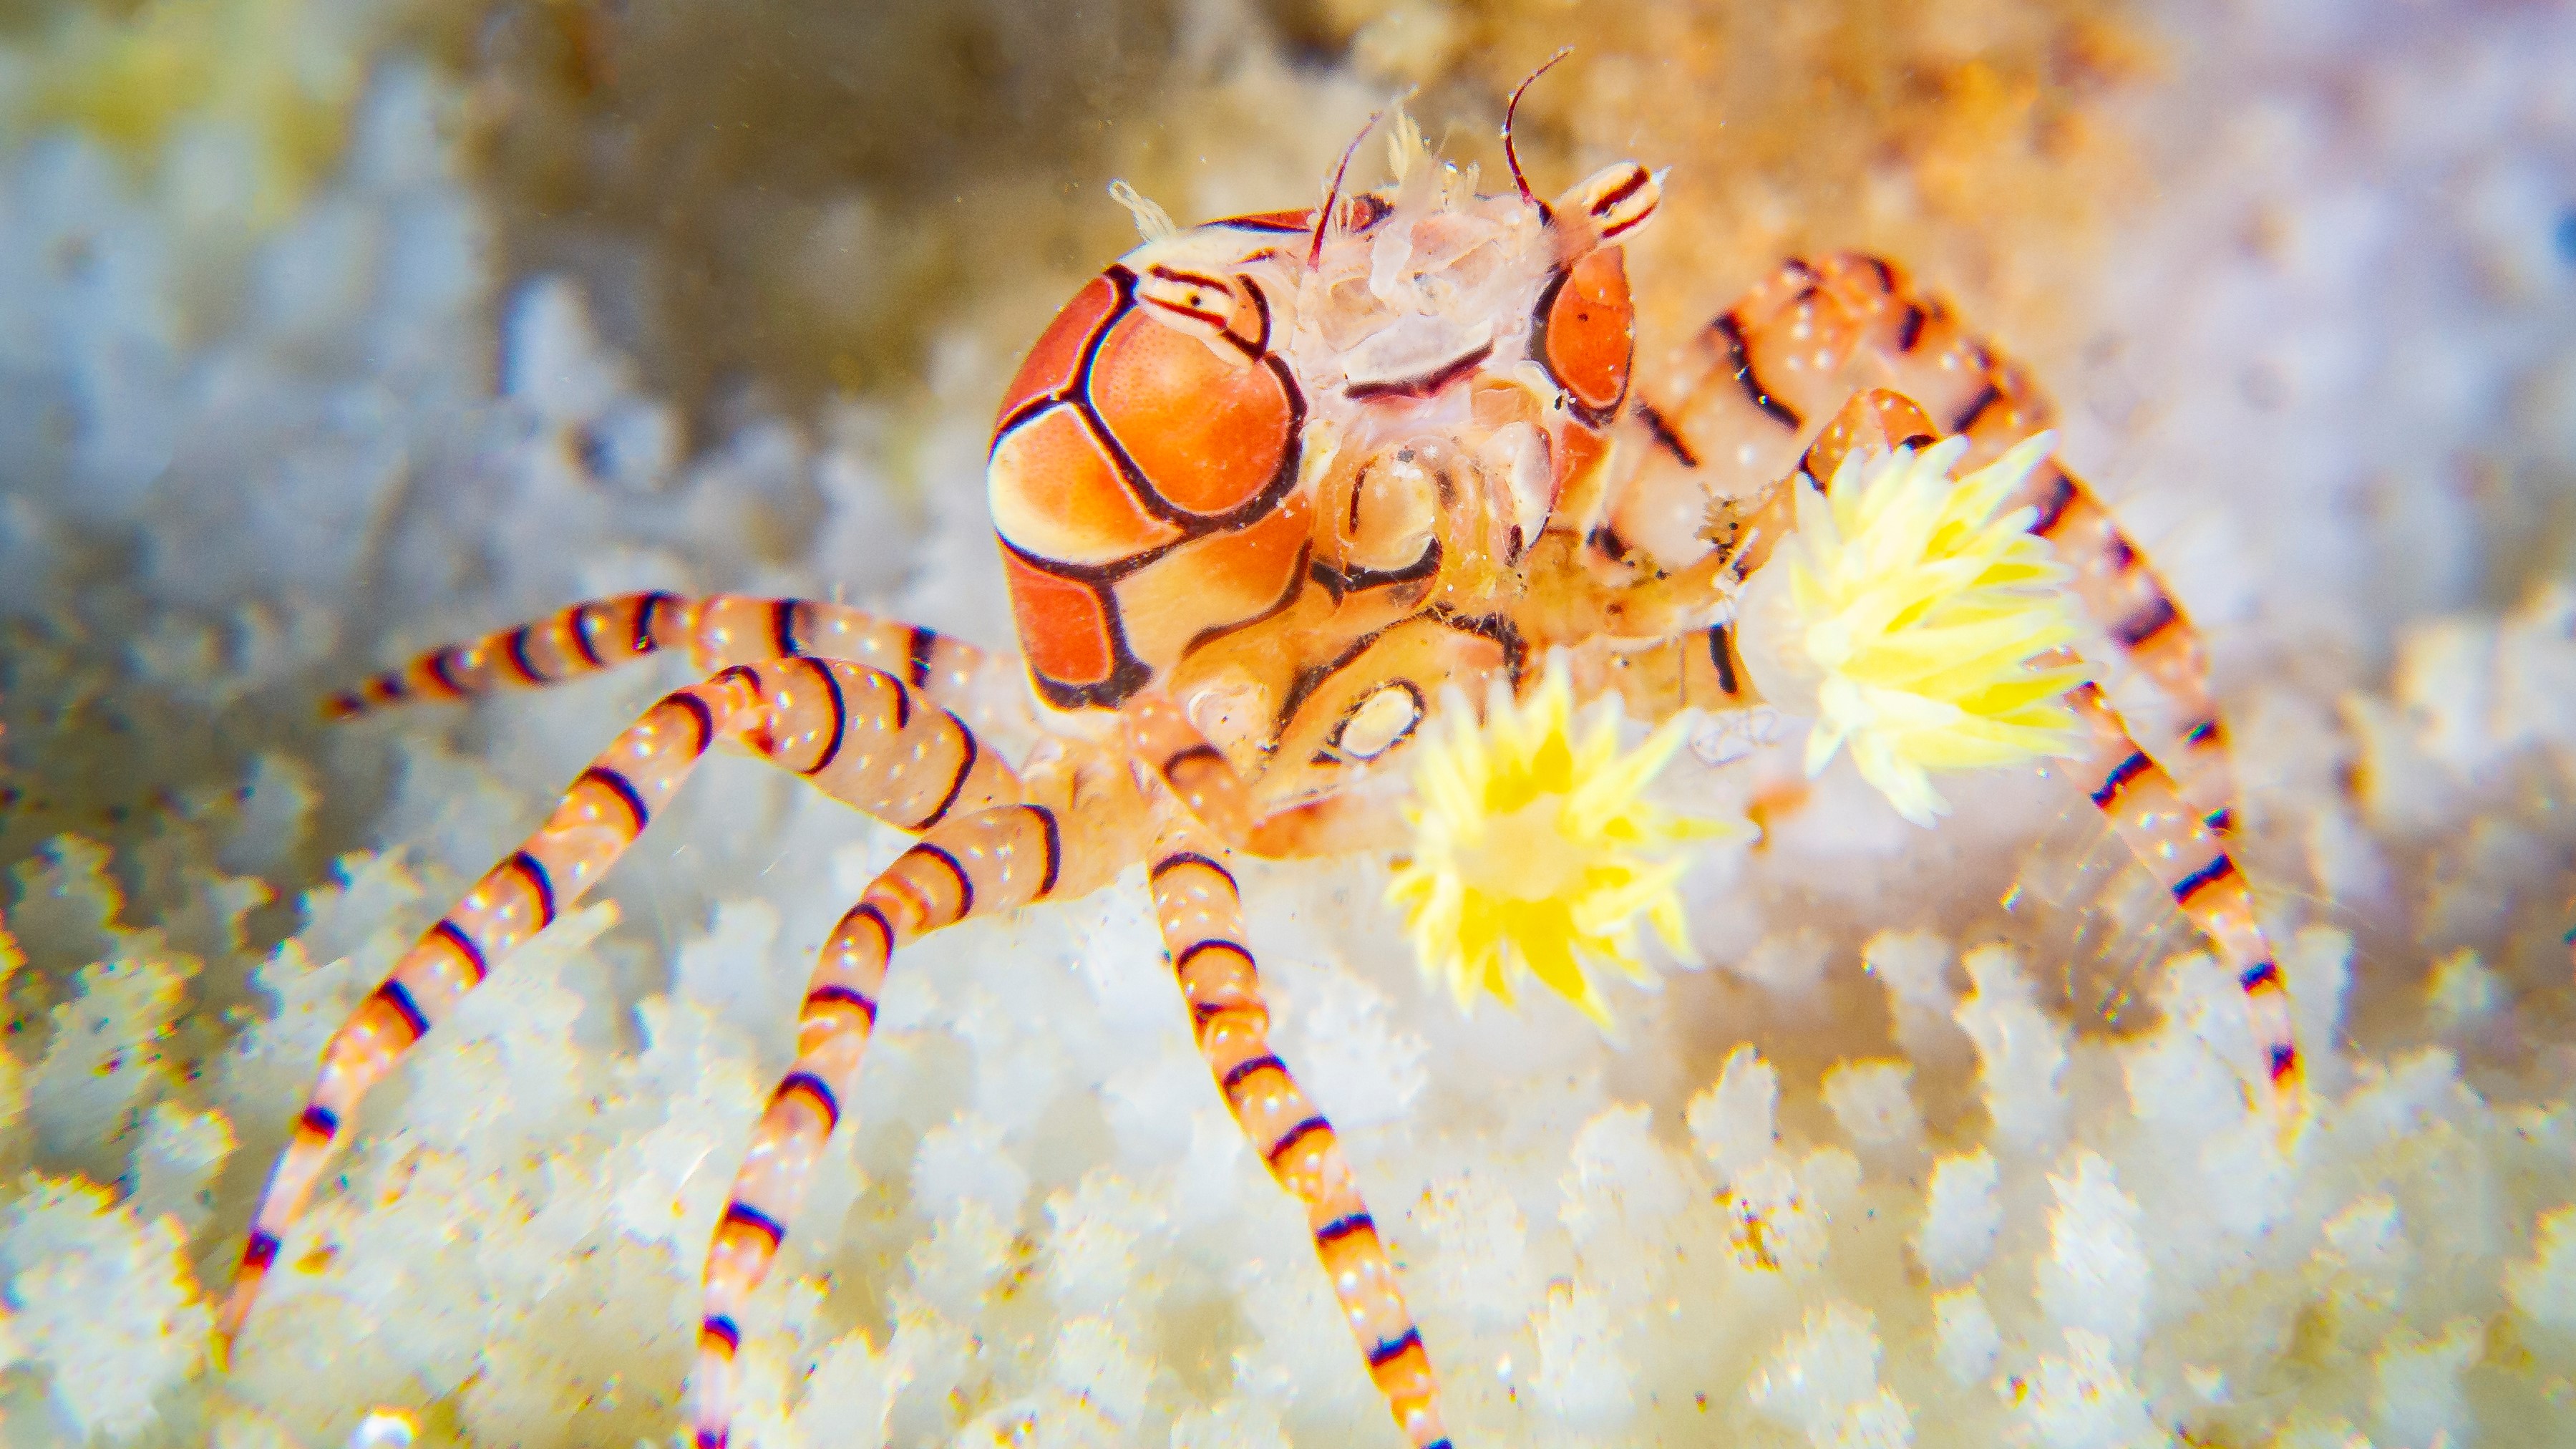 Pom pom crab: The crustacean that uses anemones as boxing gloves